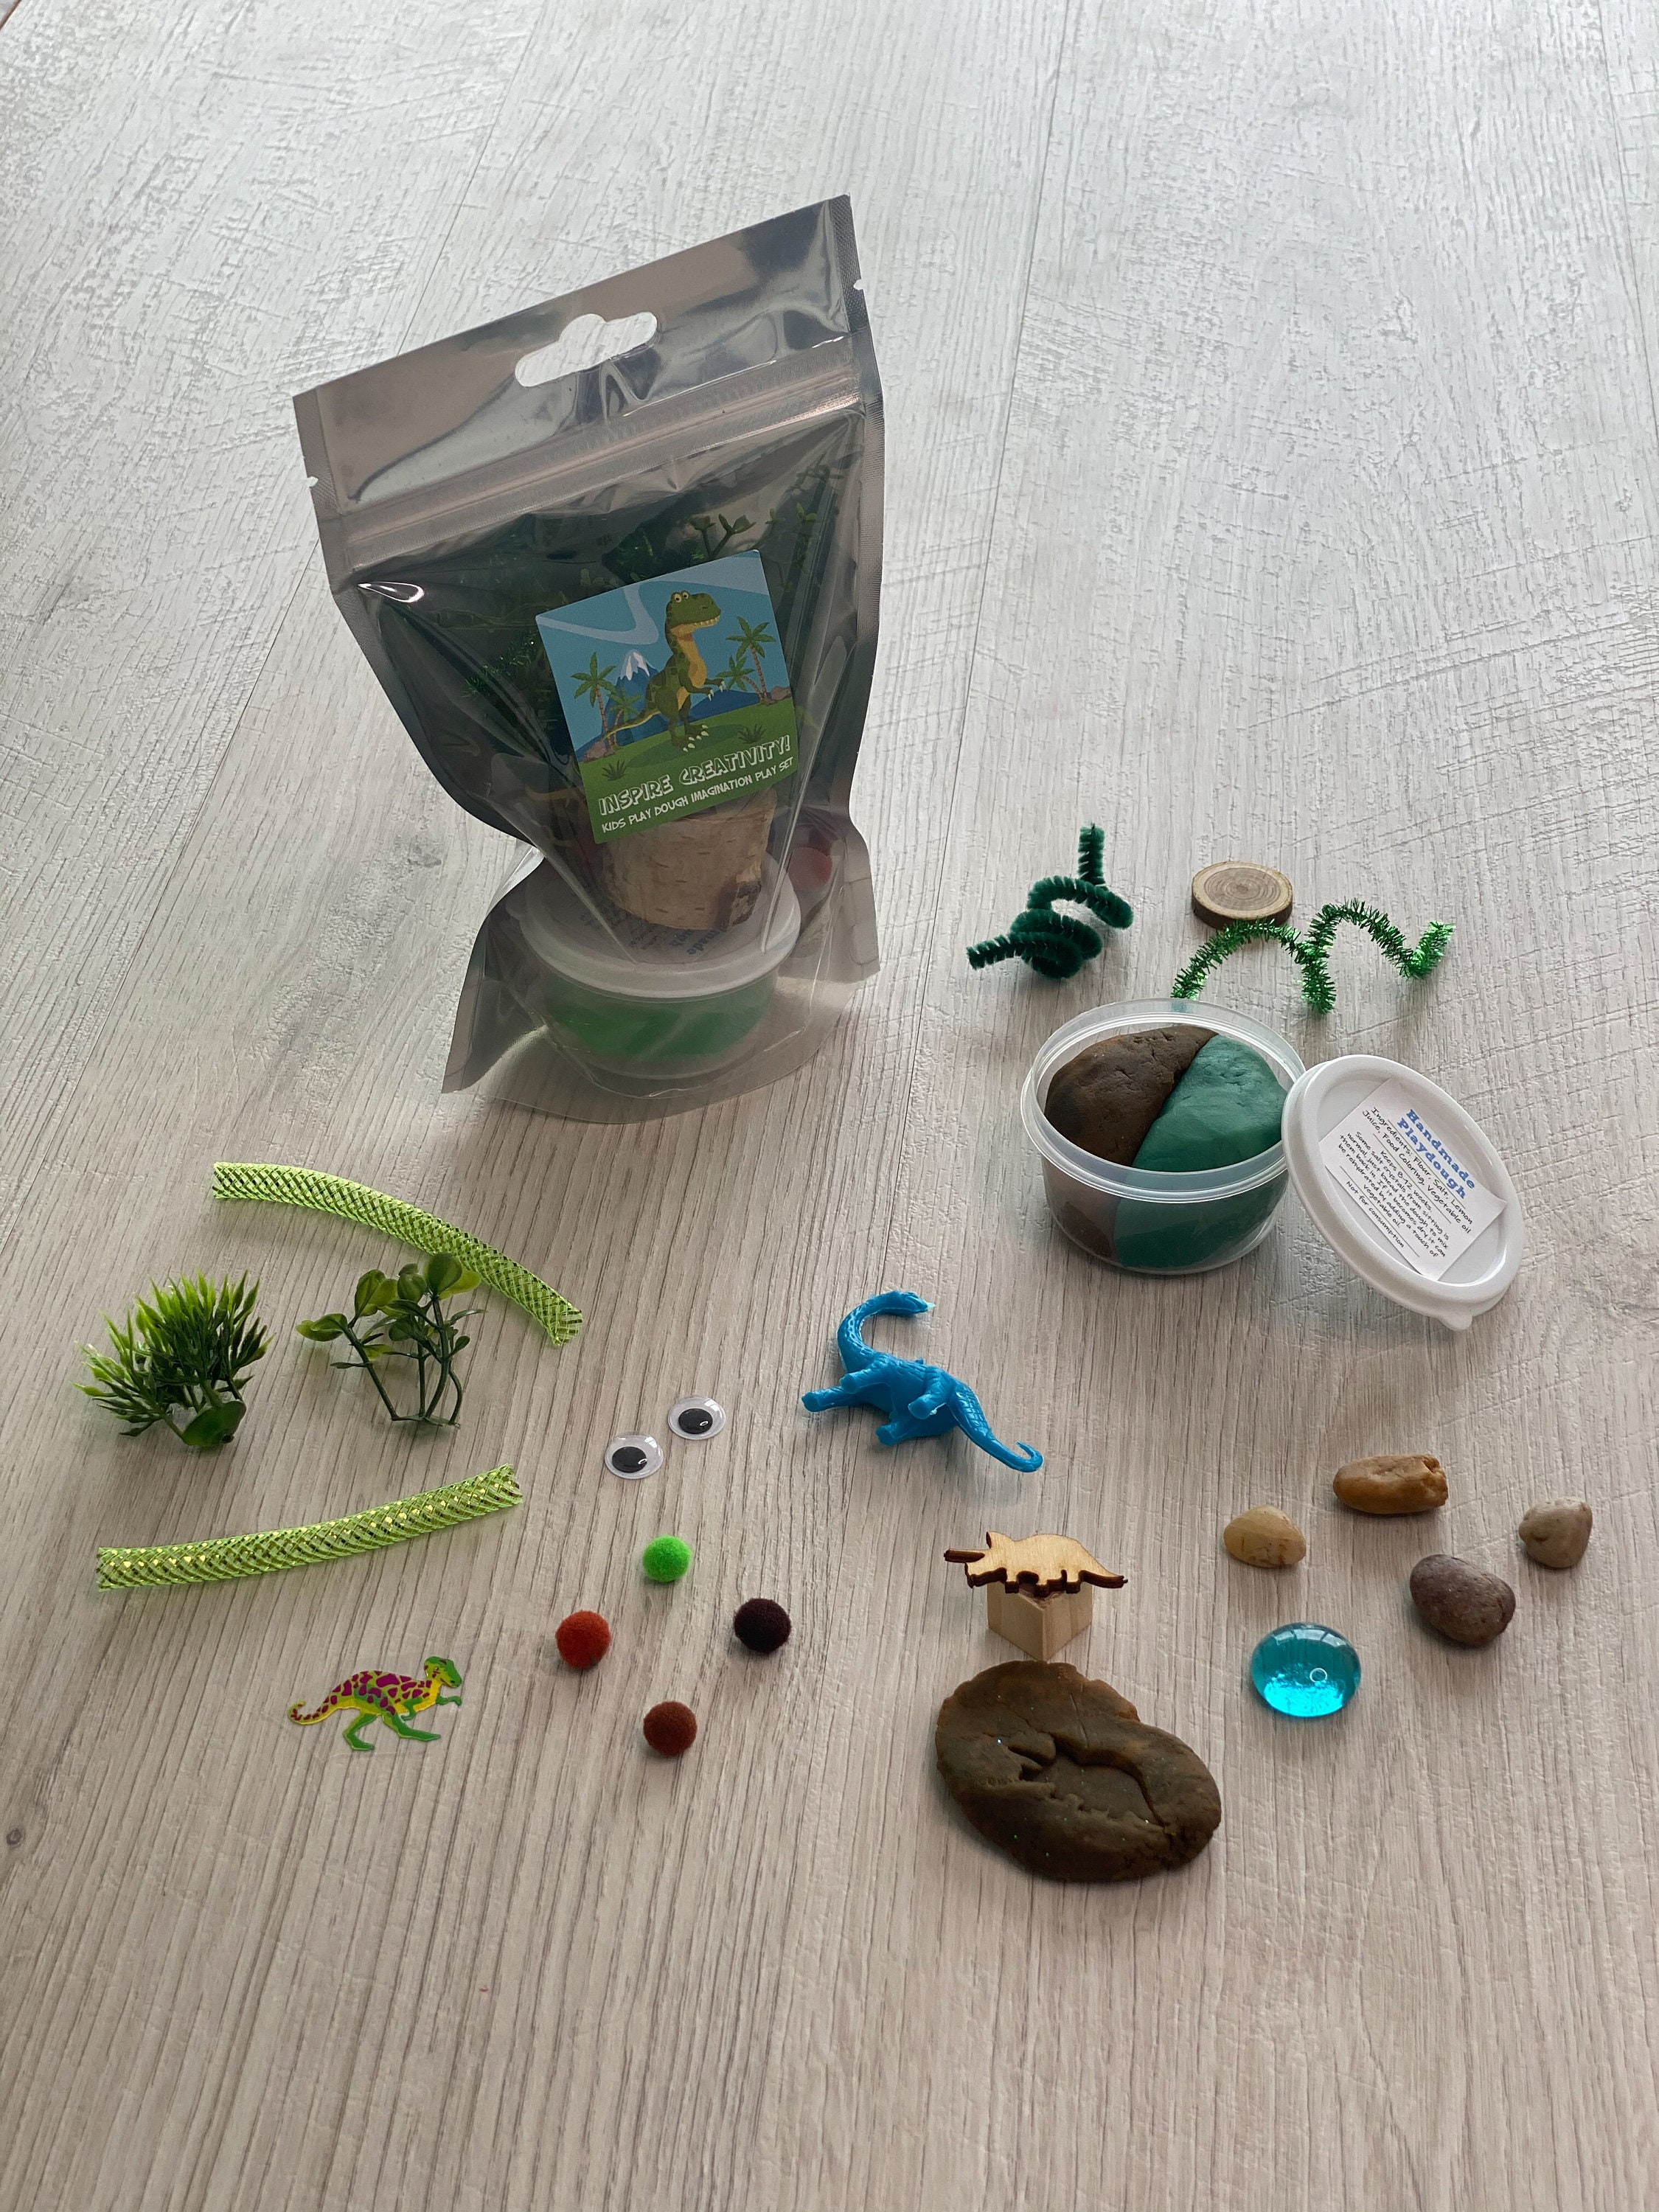 Dinosaur Theme Kids Sensory Play Activity Kit Includes 4 Colors of Handmade Play  Dough and Accessories Inspire Kids Creativity 